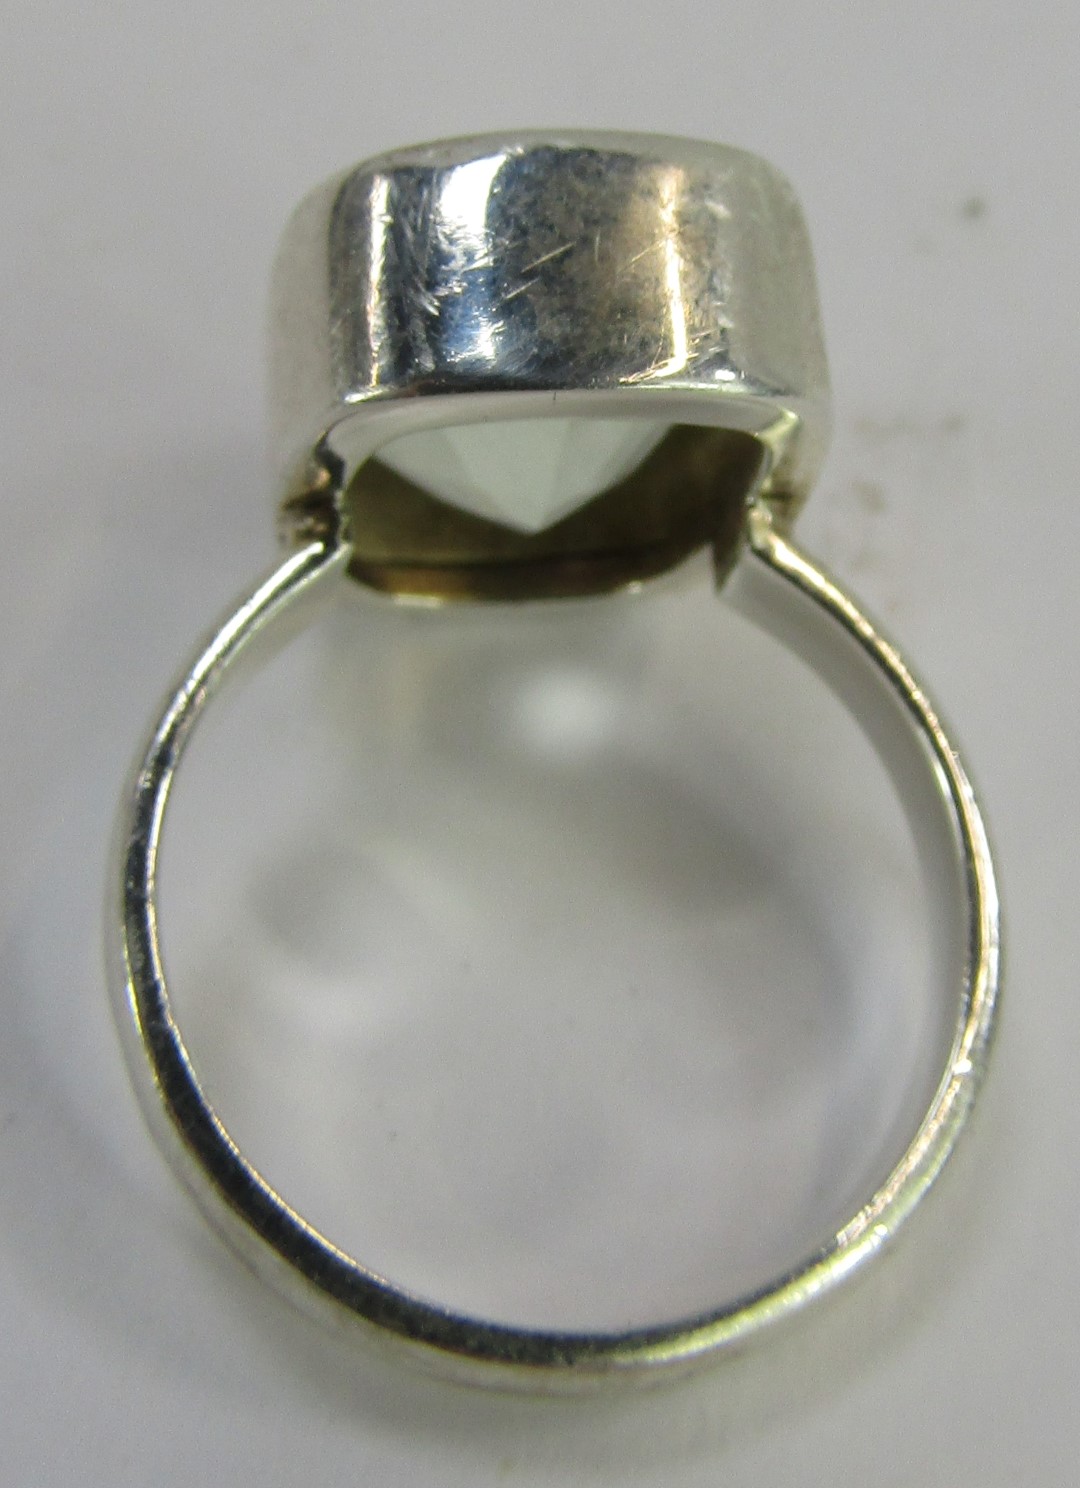 A dress ring, with a rectangular cut and faceted pale green stone, in a rub over white metal border - Image 2 of 3